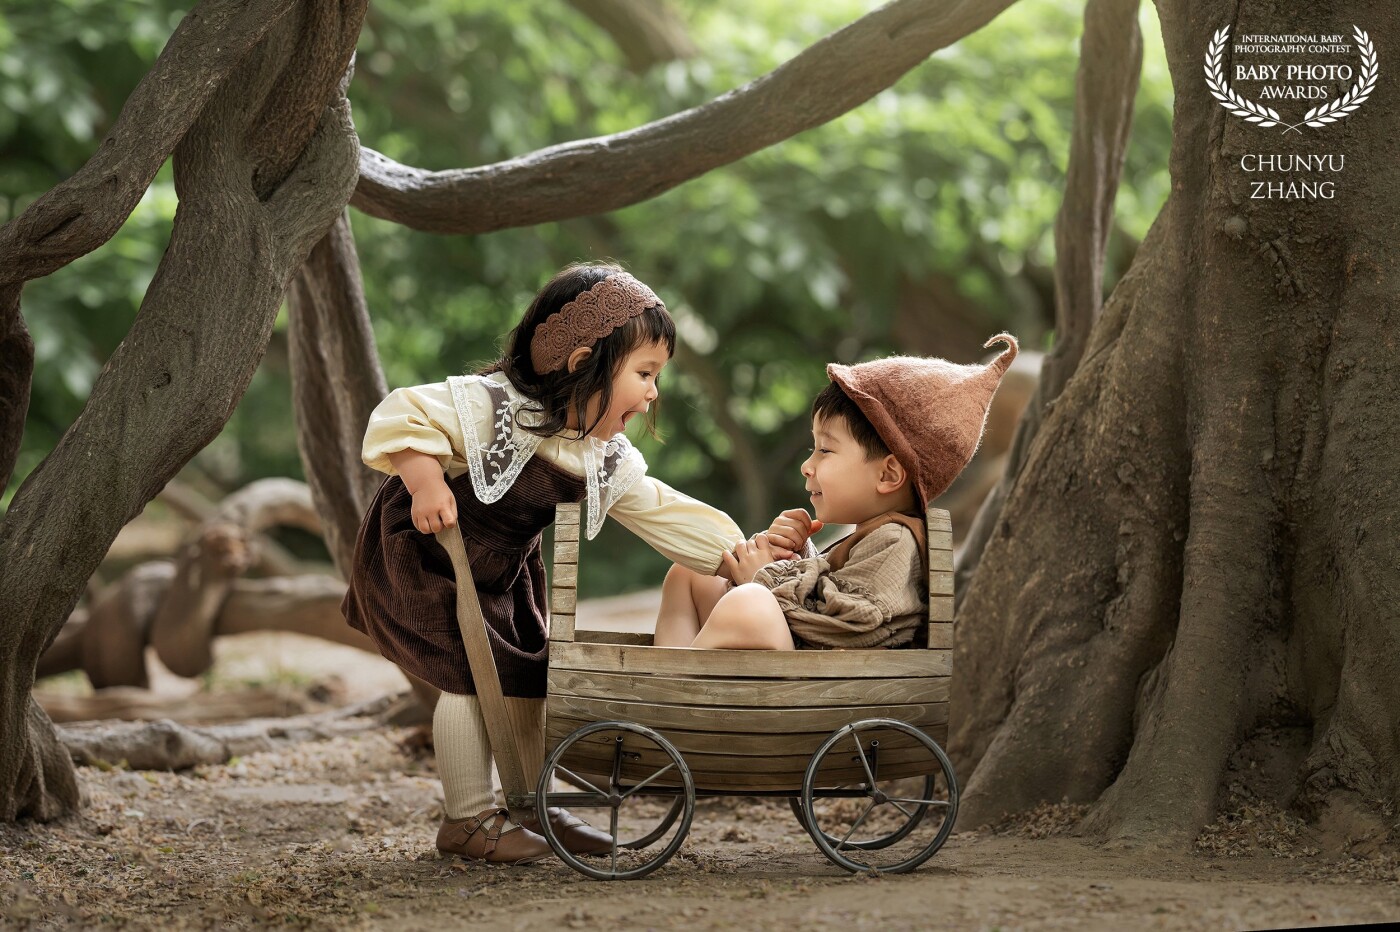 A pair of brothers and sisters were playing in the woods. The elder brother climbed into a cart made of tree stumps. The younger sister also wanted to go in, so she yelled at the elder brother and told him to come out.